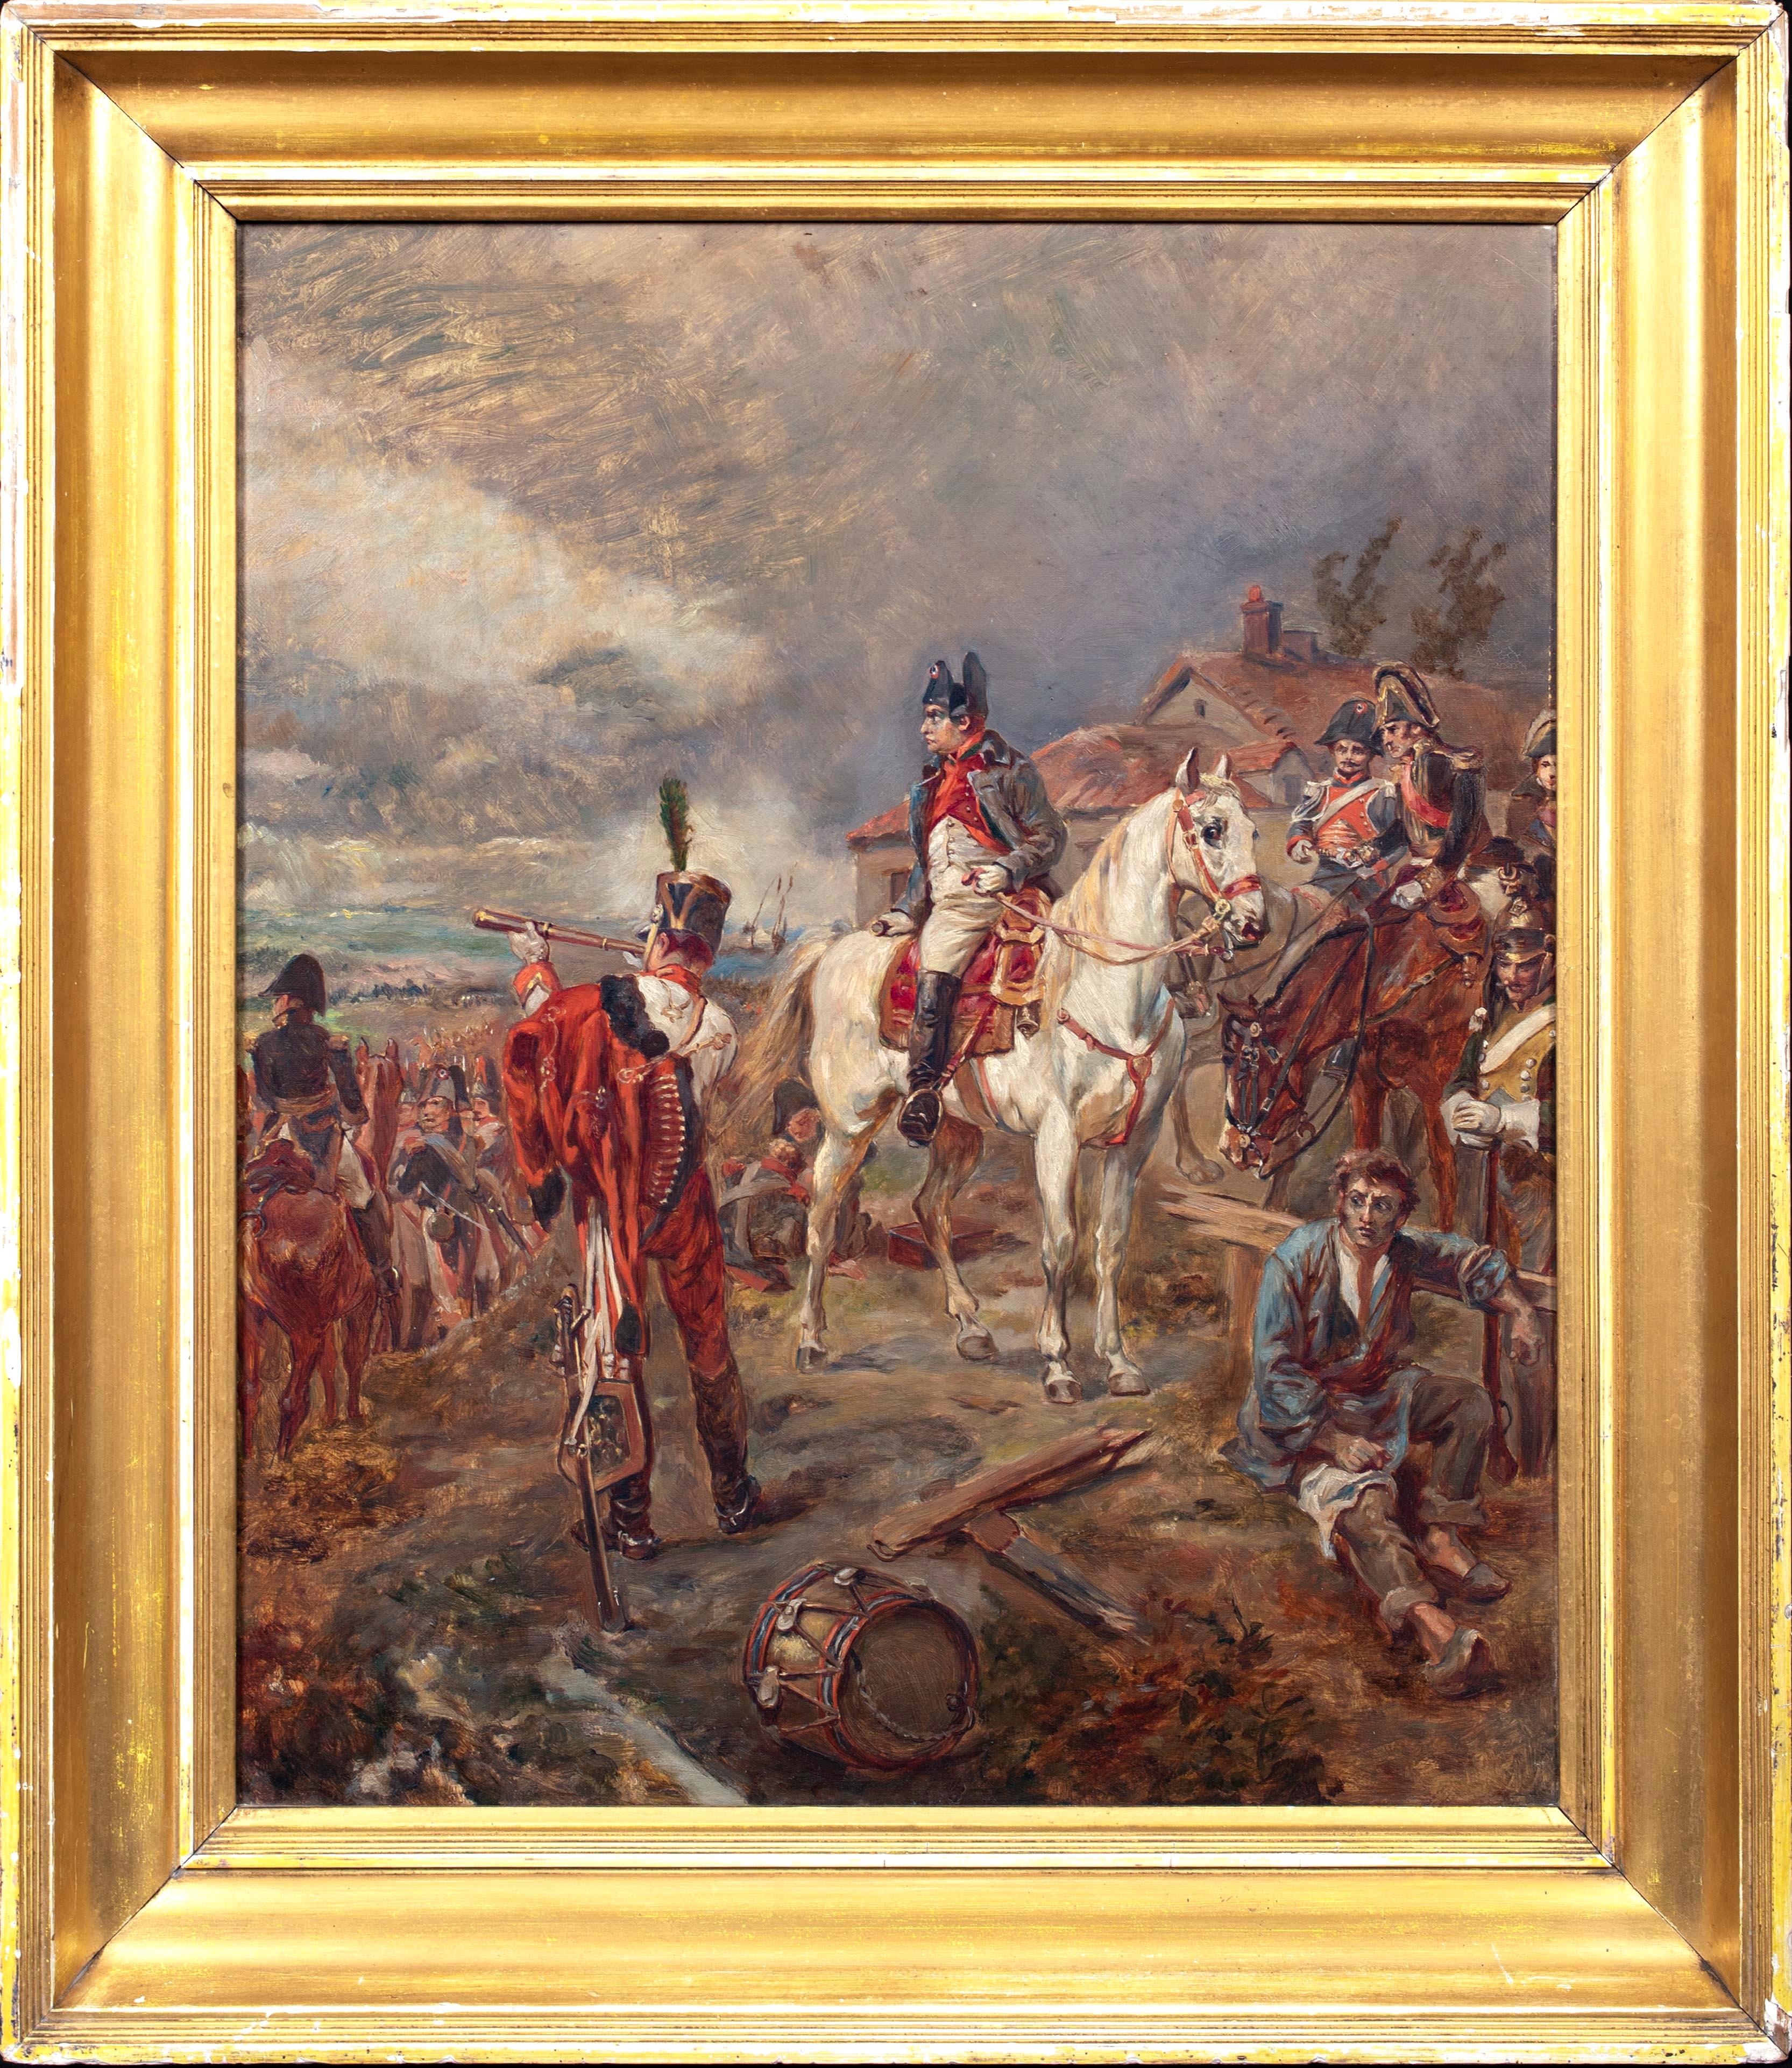 Ernest Crofts Portrait Painting - Napoleon At The Battle Of Waterloo, 19th Century  by Ernest CROFTS (1847-1911) 